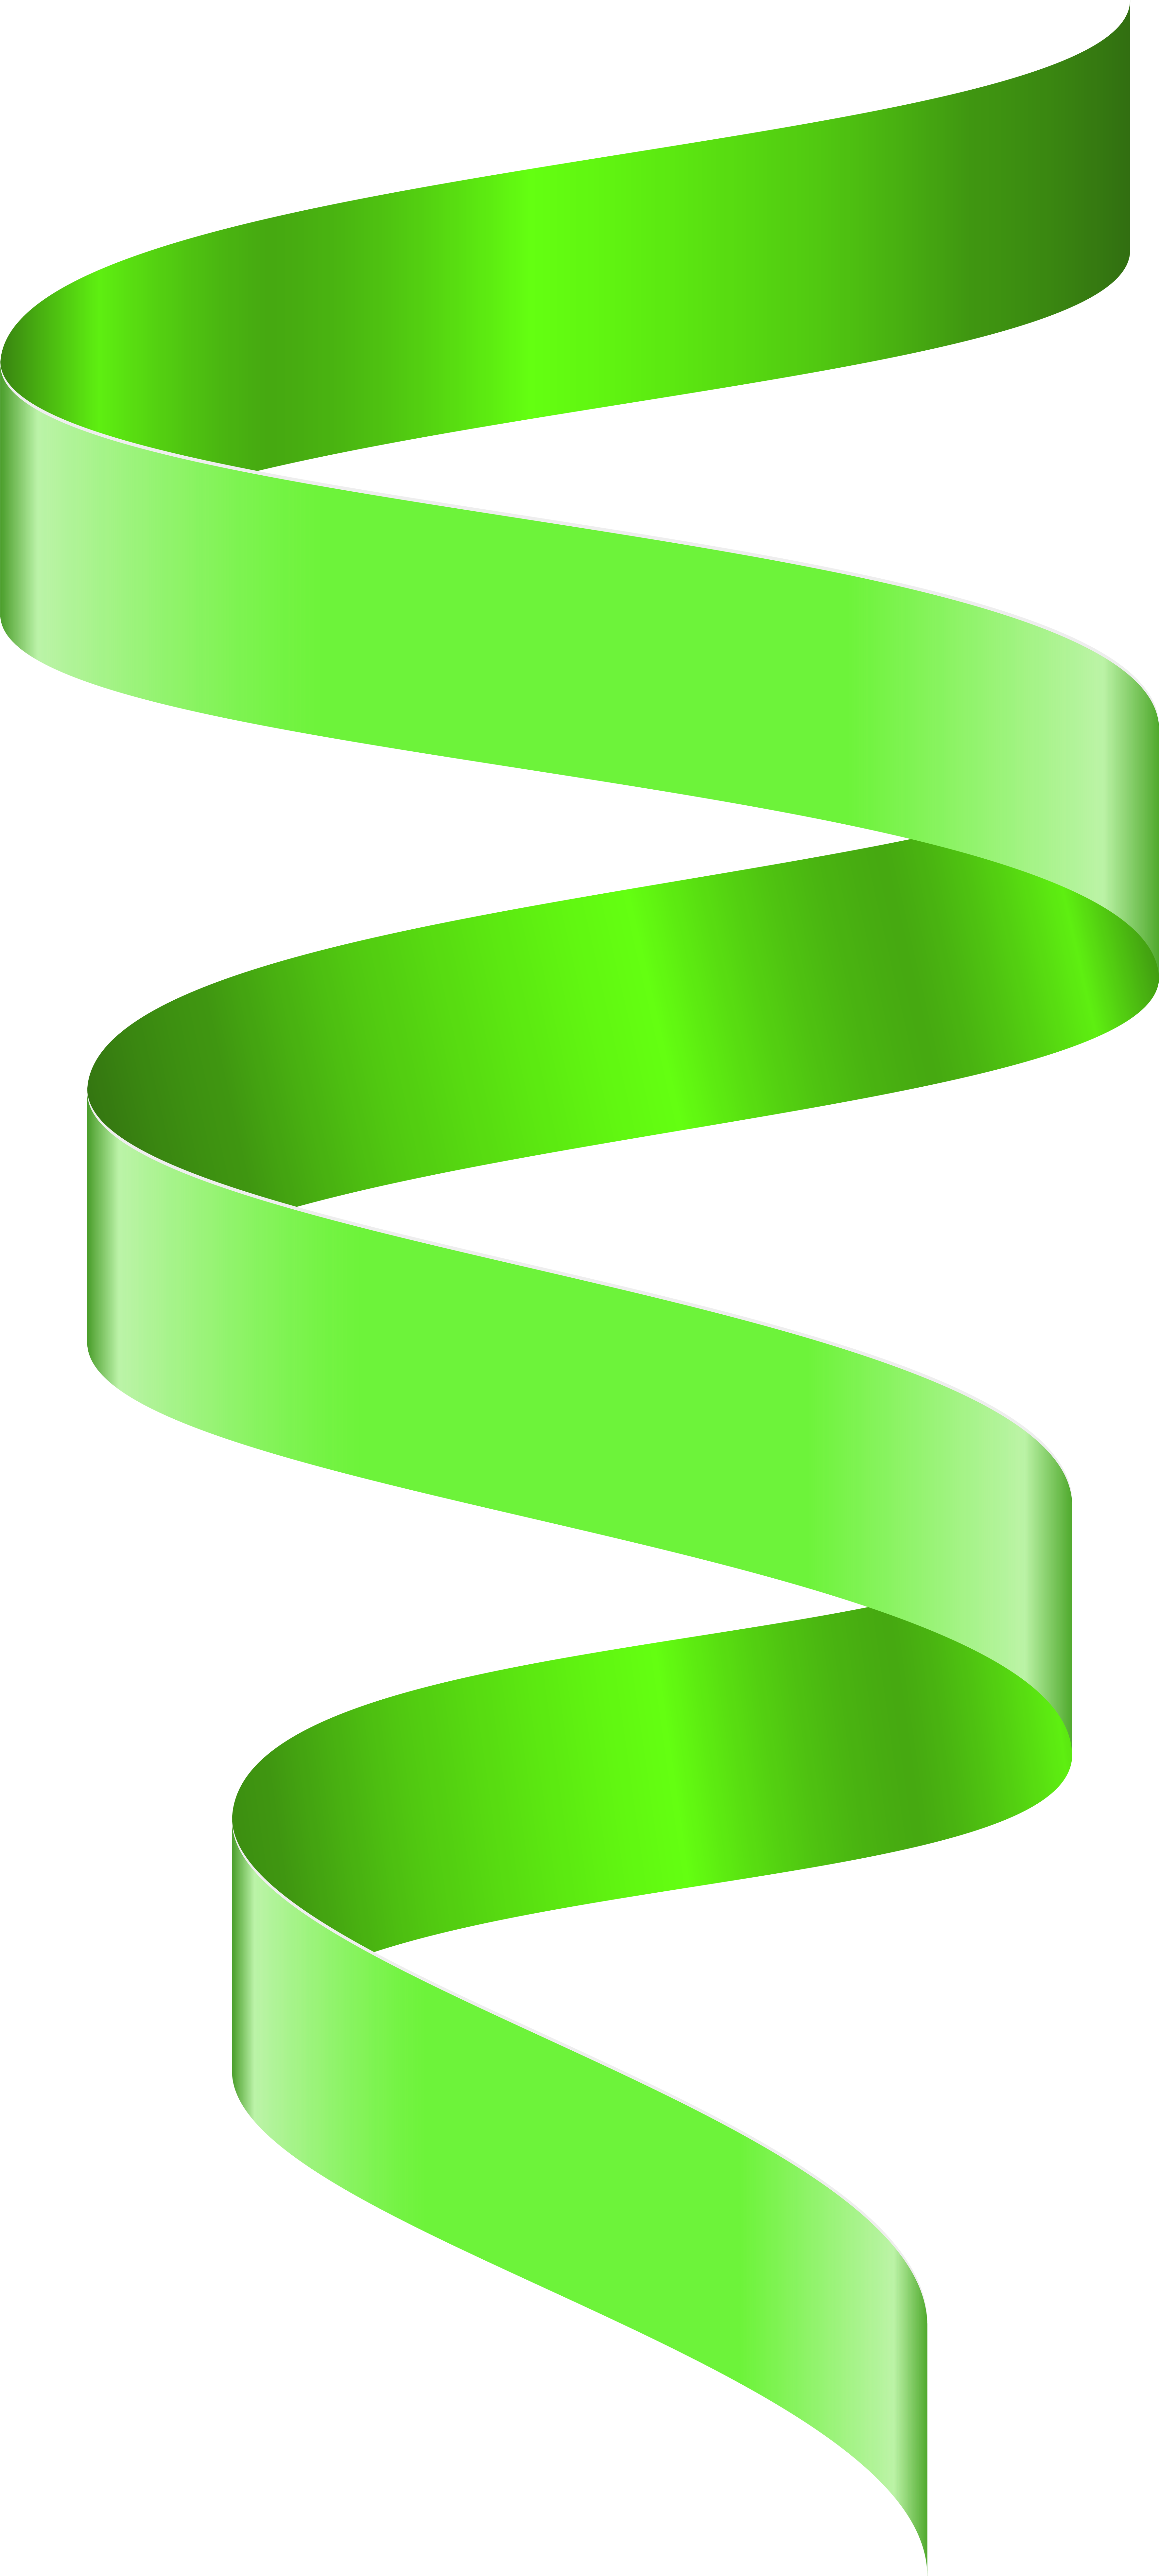 Green Curly Ribbon Graphic